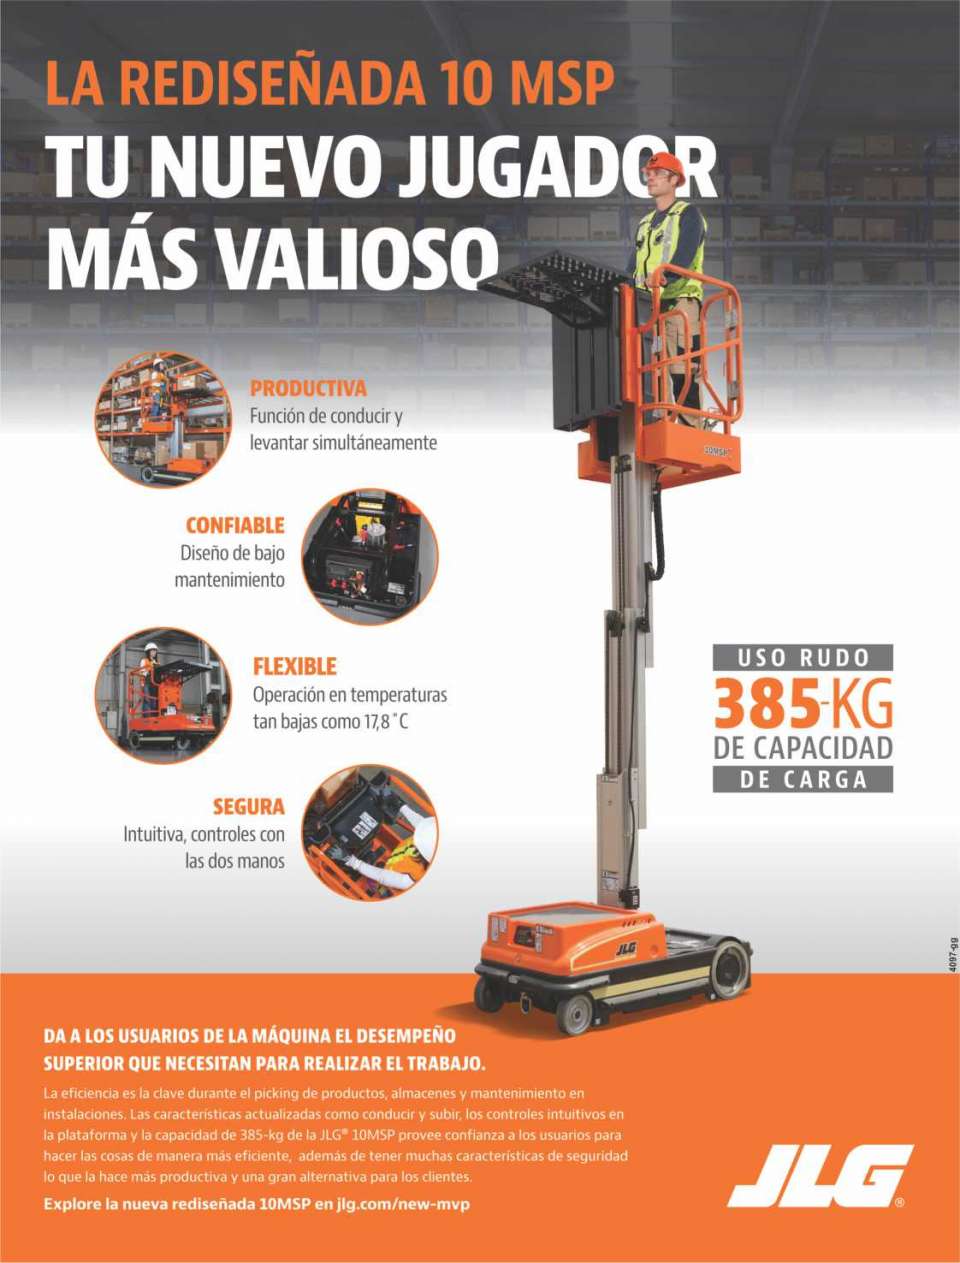 JLG manufactures access equipment, leader in the industry. Each telescopic manipulator, scissor lift and boom lift we sell, is backed by a team of people.